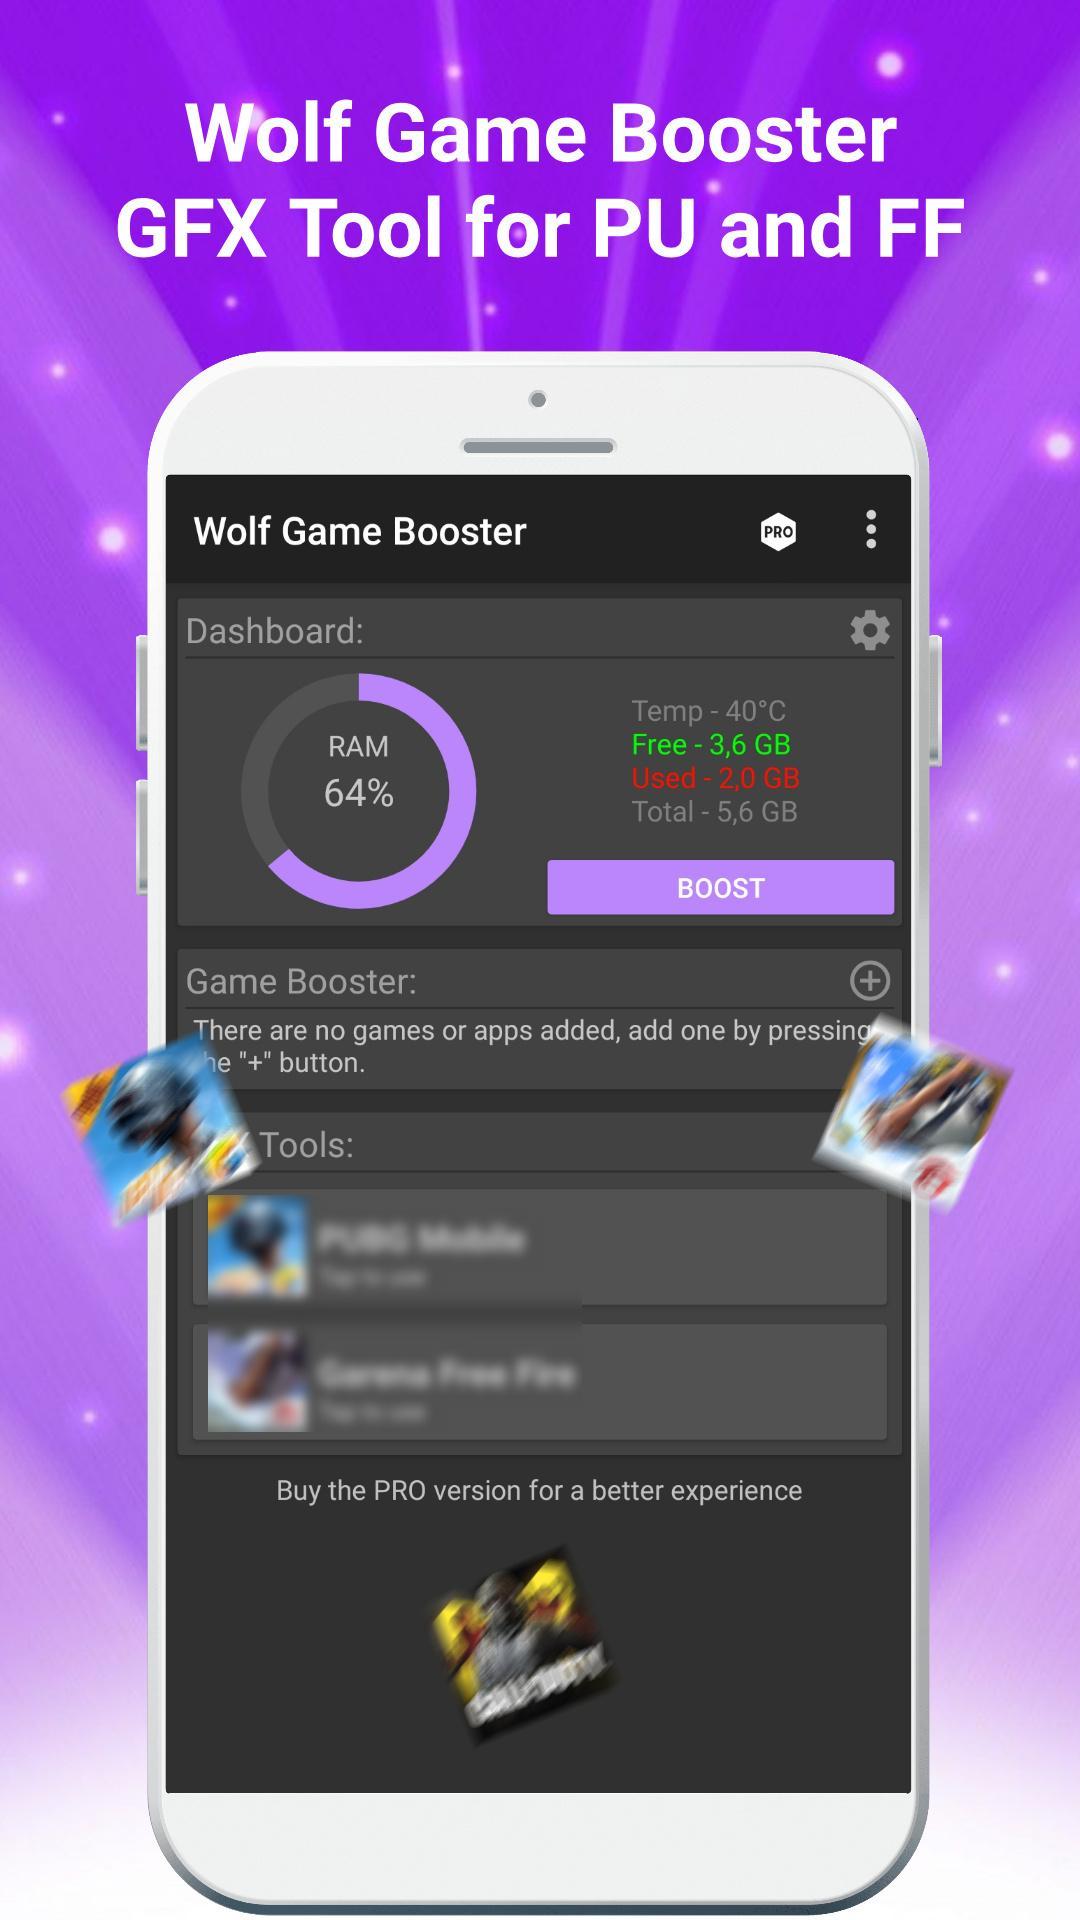 Wolf Game Booster amp; GFX Tool for PU and FF 1.2.3 Screenshot 1